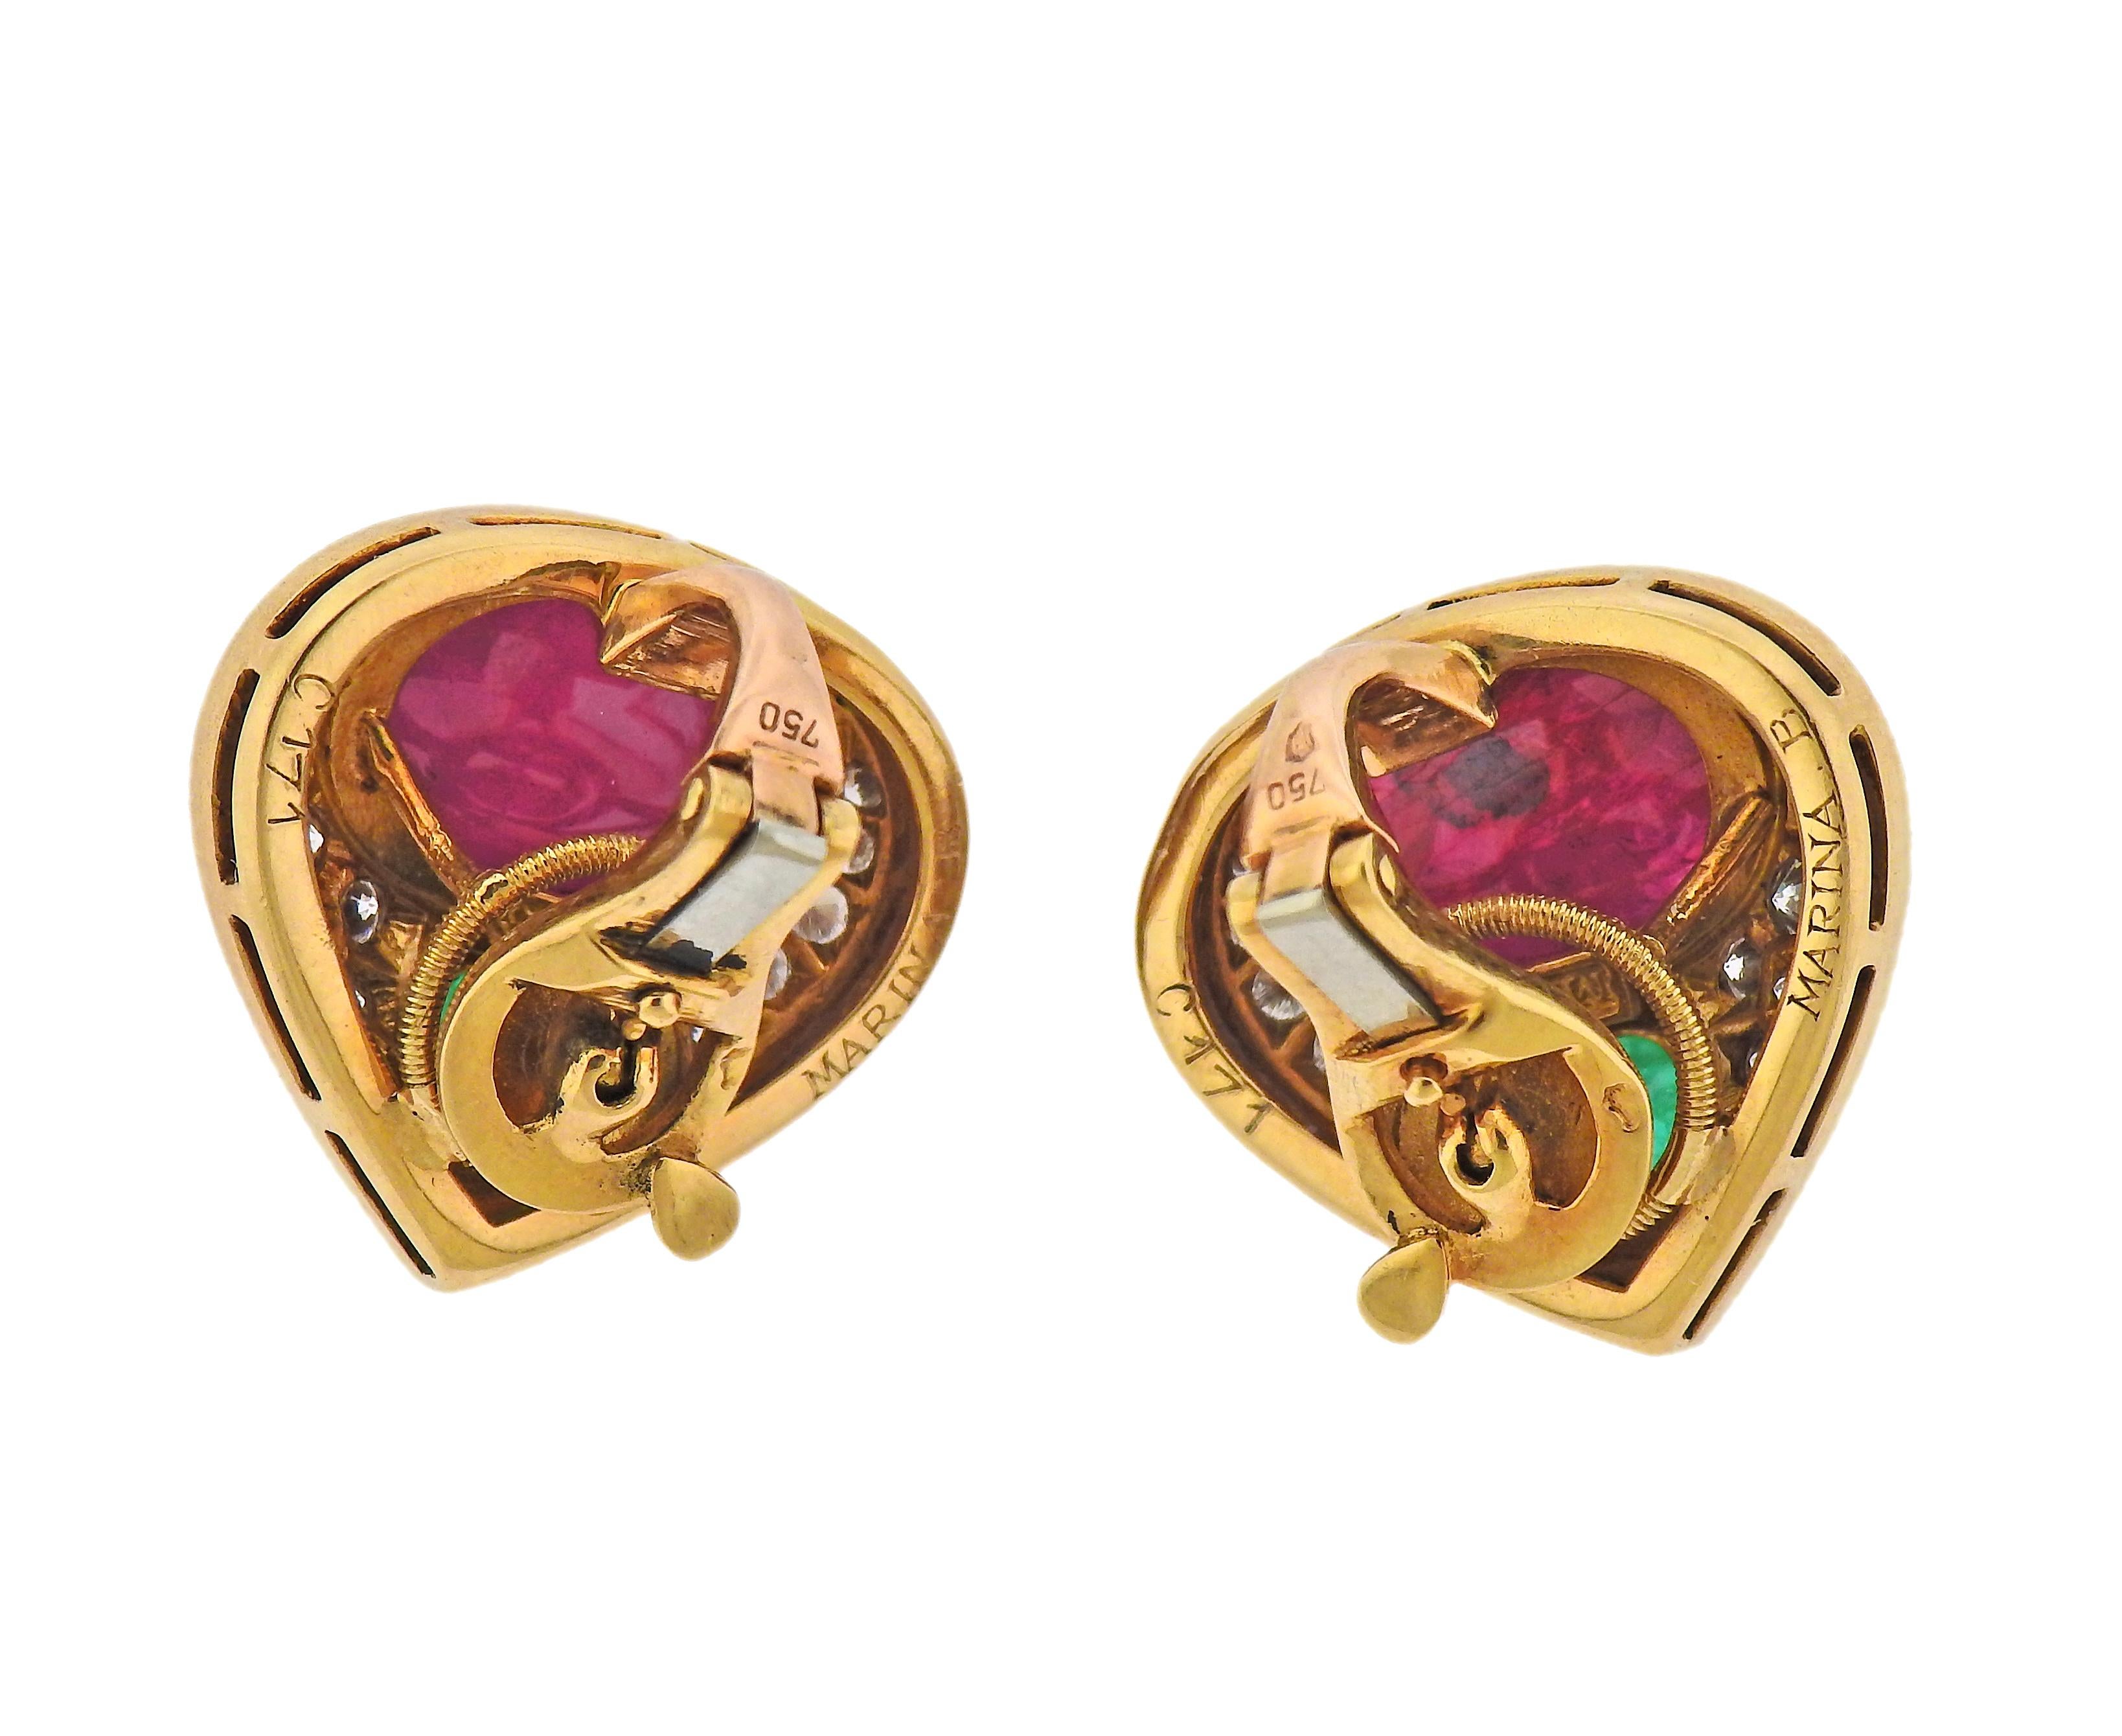 Pair of 18k yellow gold earrings by Marina B, with ruby, emerald cabochons and approx. 1.00cts in diamonds. Earrings are 20mm x 20mm. Marked: Marina B, C171, 750. Weight - 18.3 grams. 